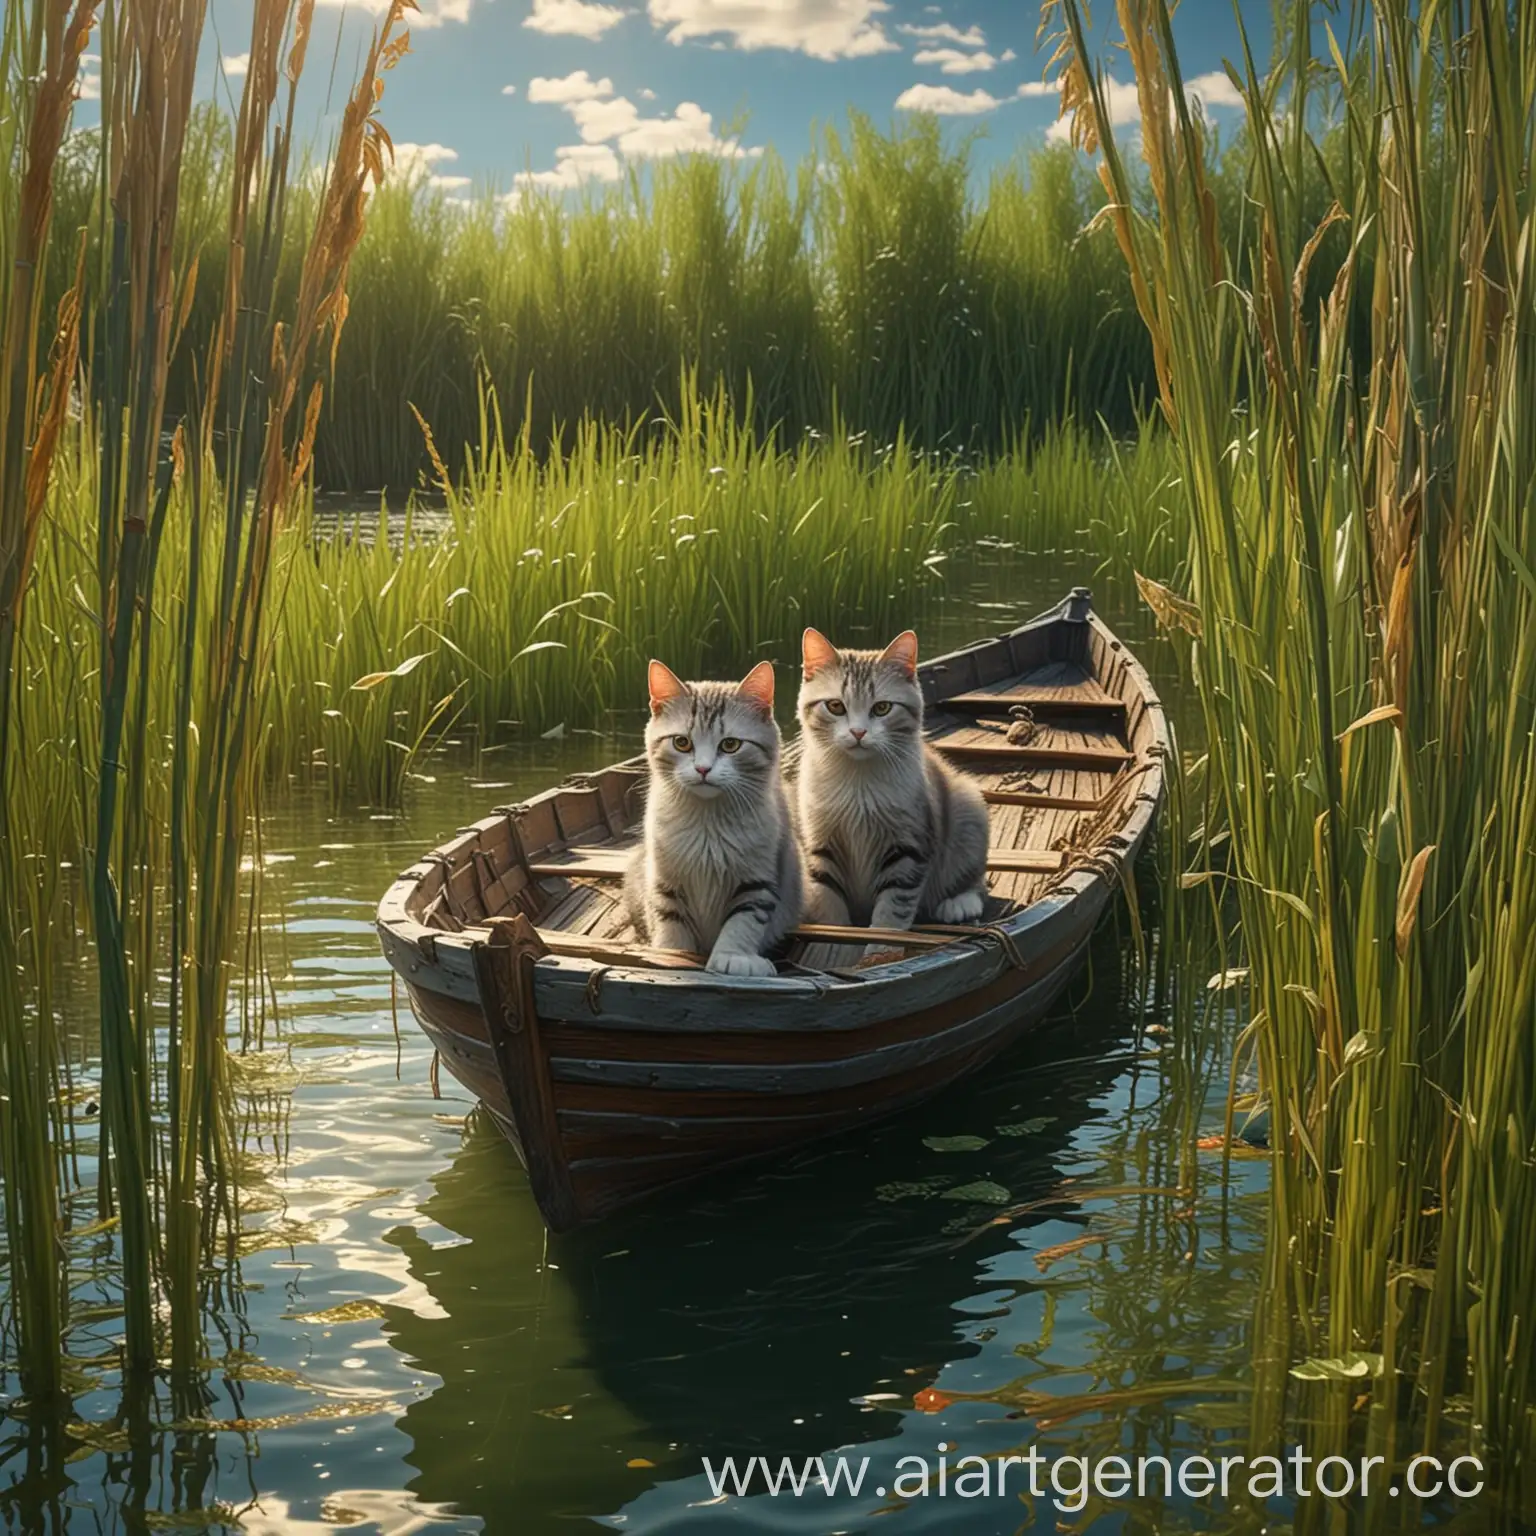 Boat-Floating-with-Cats-Swimming-in-Bright-and-Beautiful-Hyperrealistic-Scene